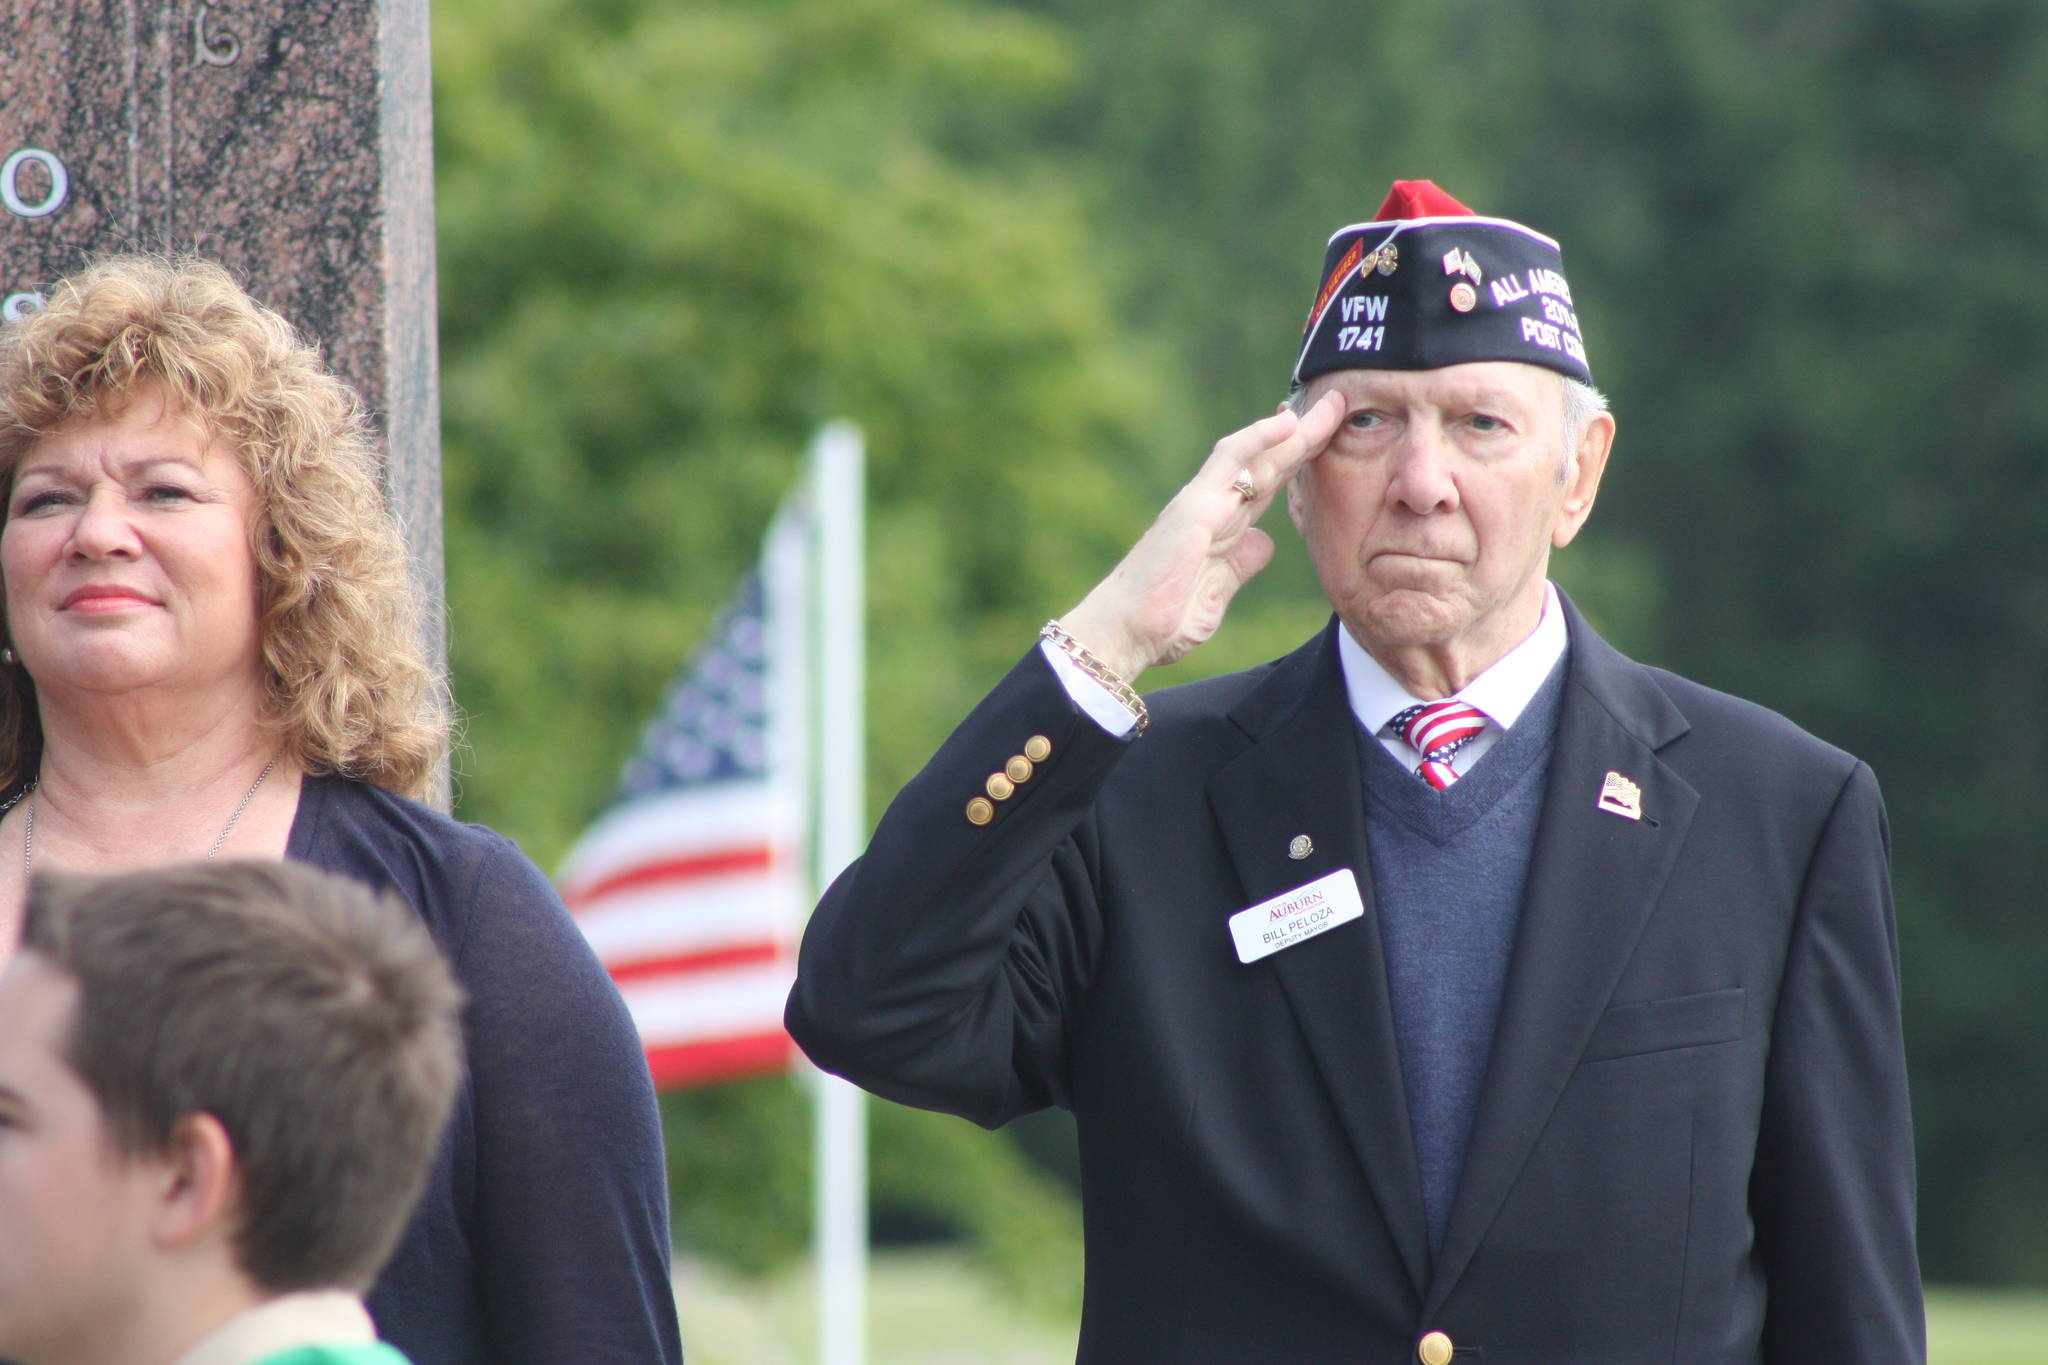 With Auburn Mayor Nancy Backus, left, Bill Peloza, deputy mayor and member of Auburn VFW Post 1741, stands and salutes the flag during the Memorial Day processional. MARK KLAAS, Auburn Reporter